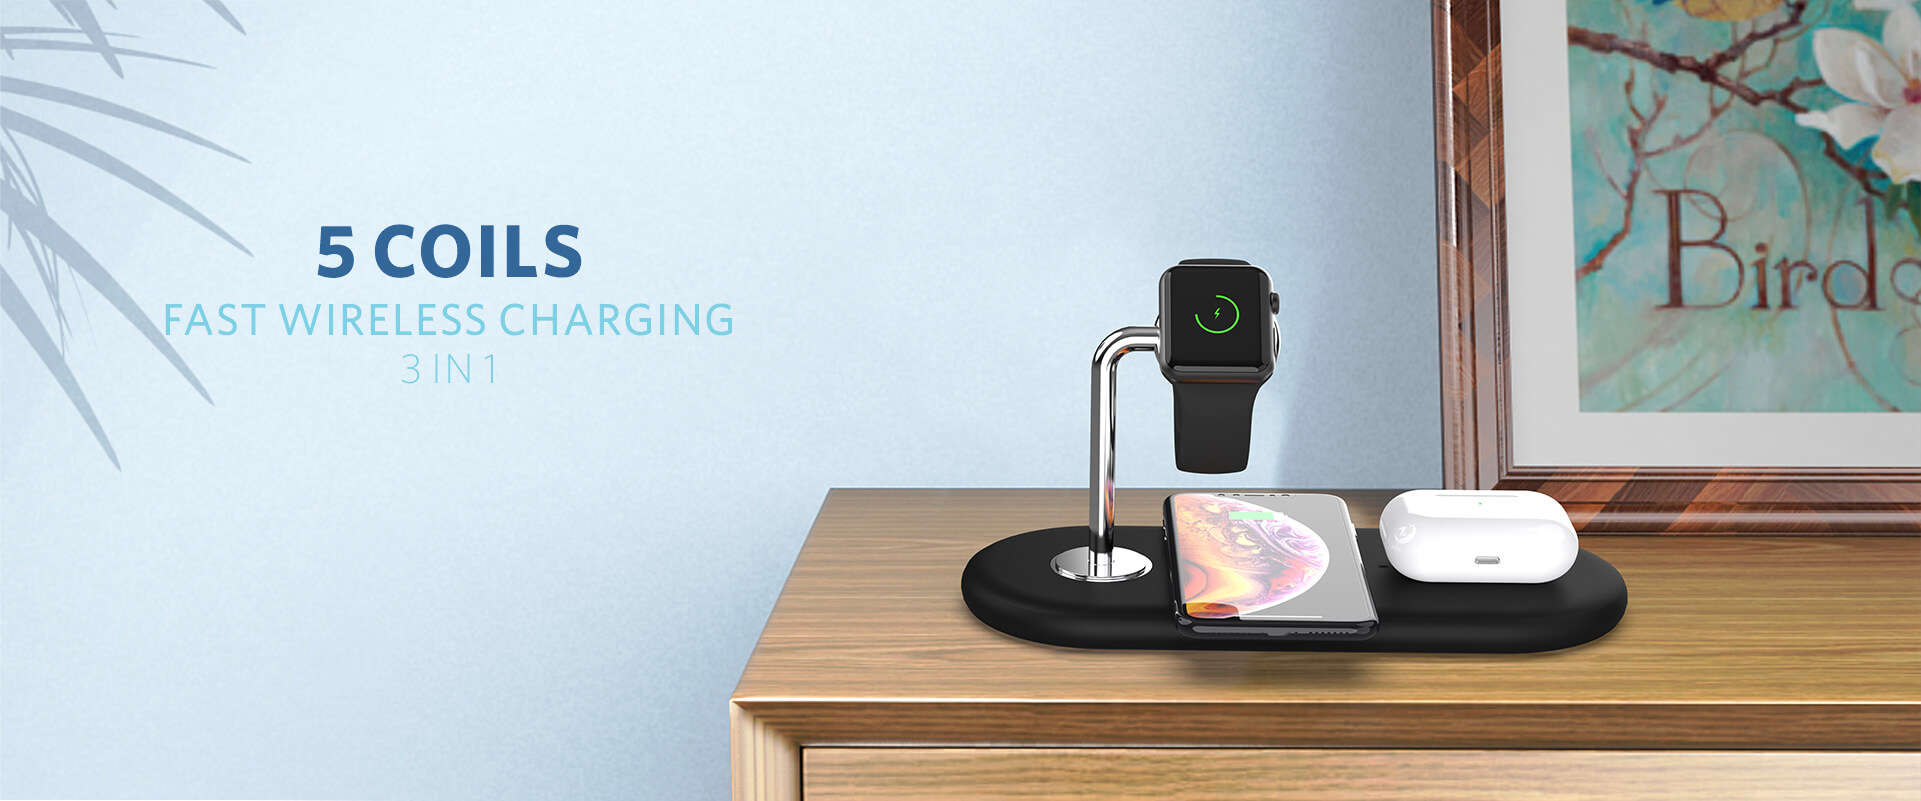 5 coils 3 in 1 wireless charging station